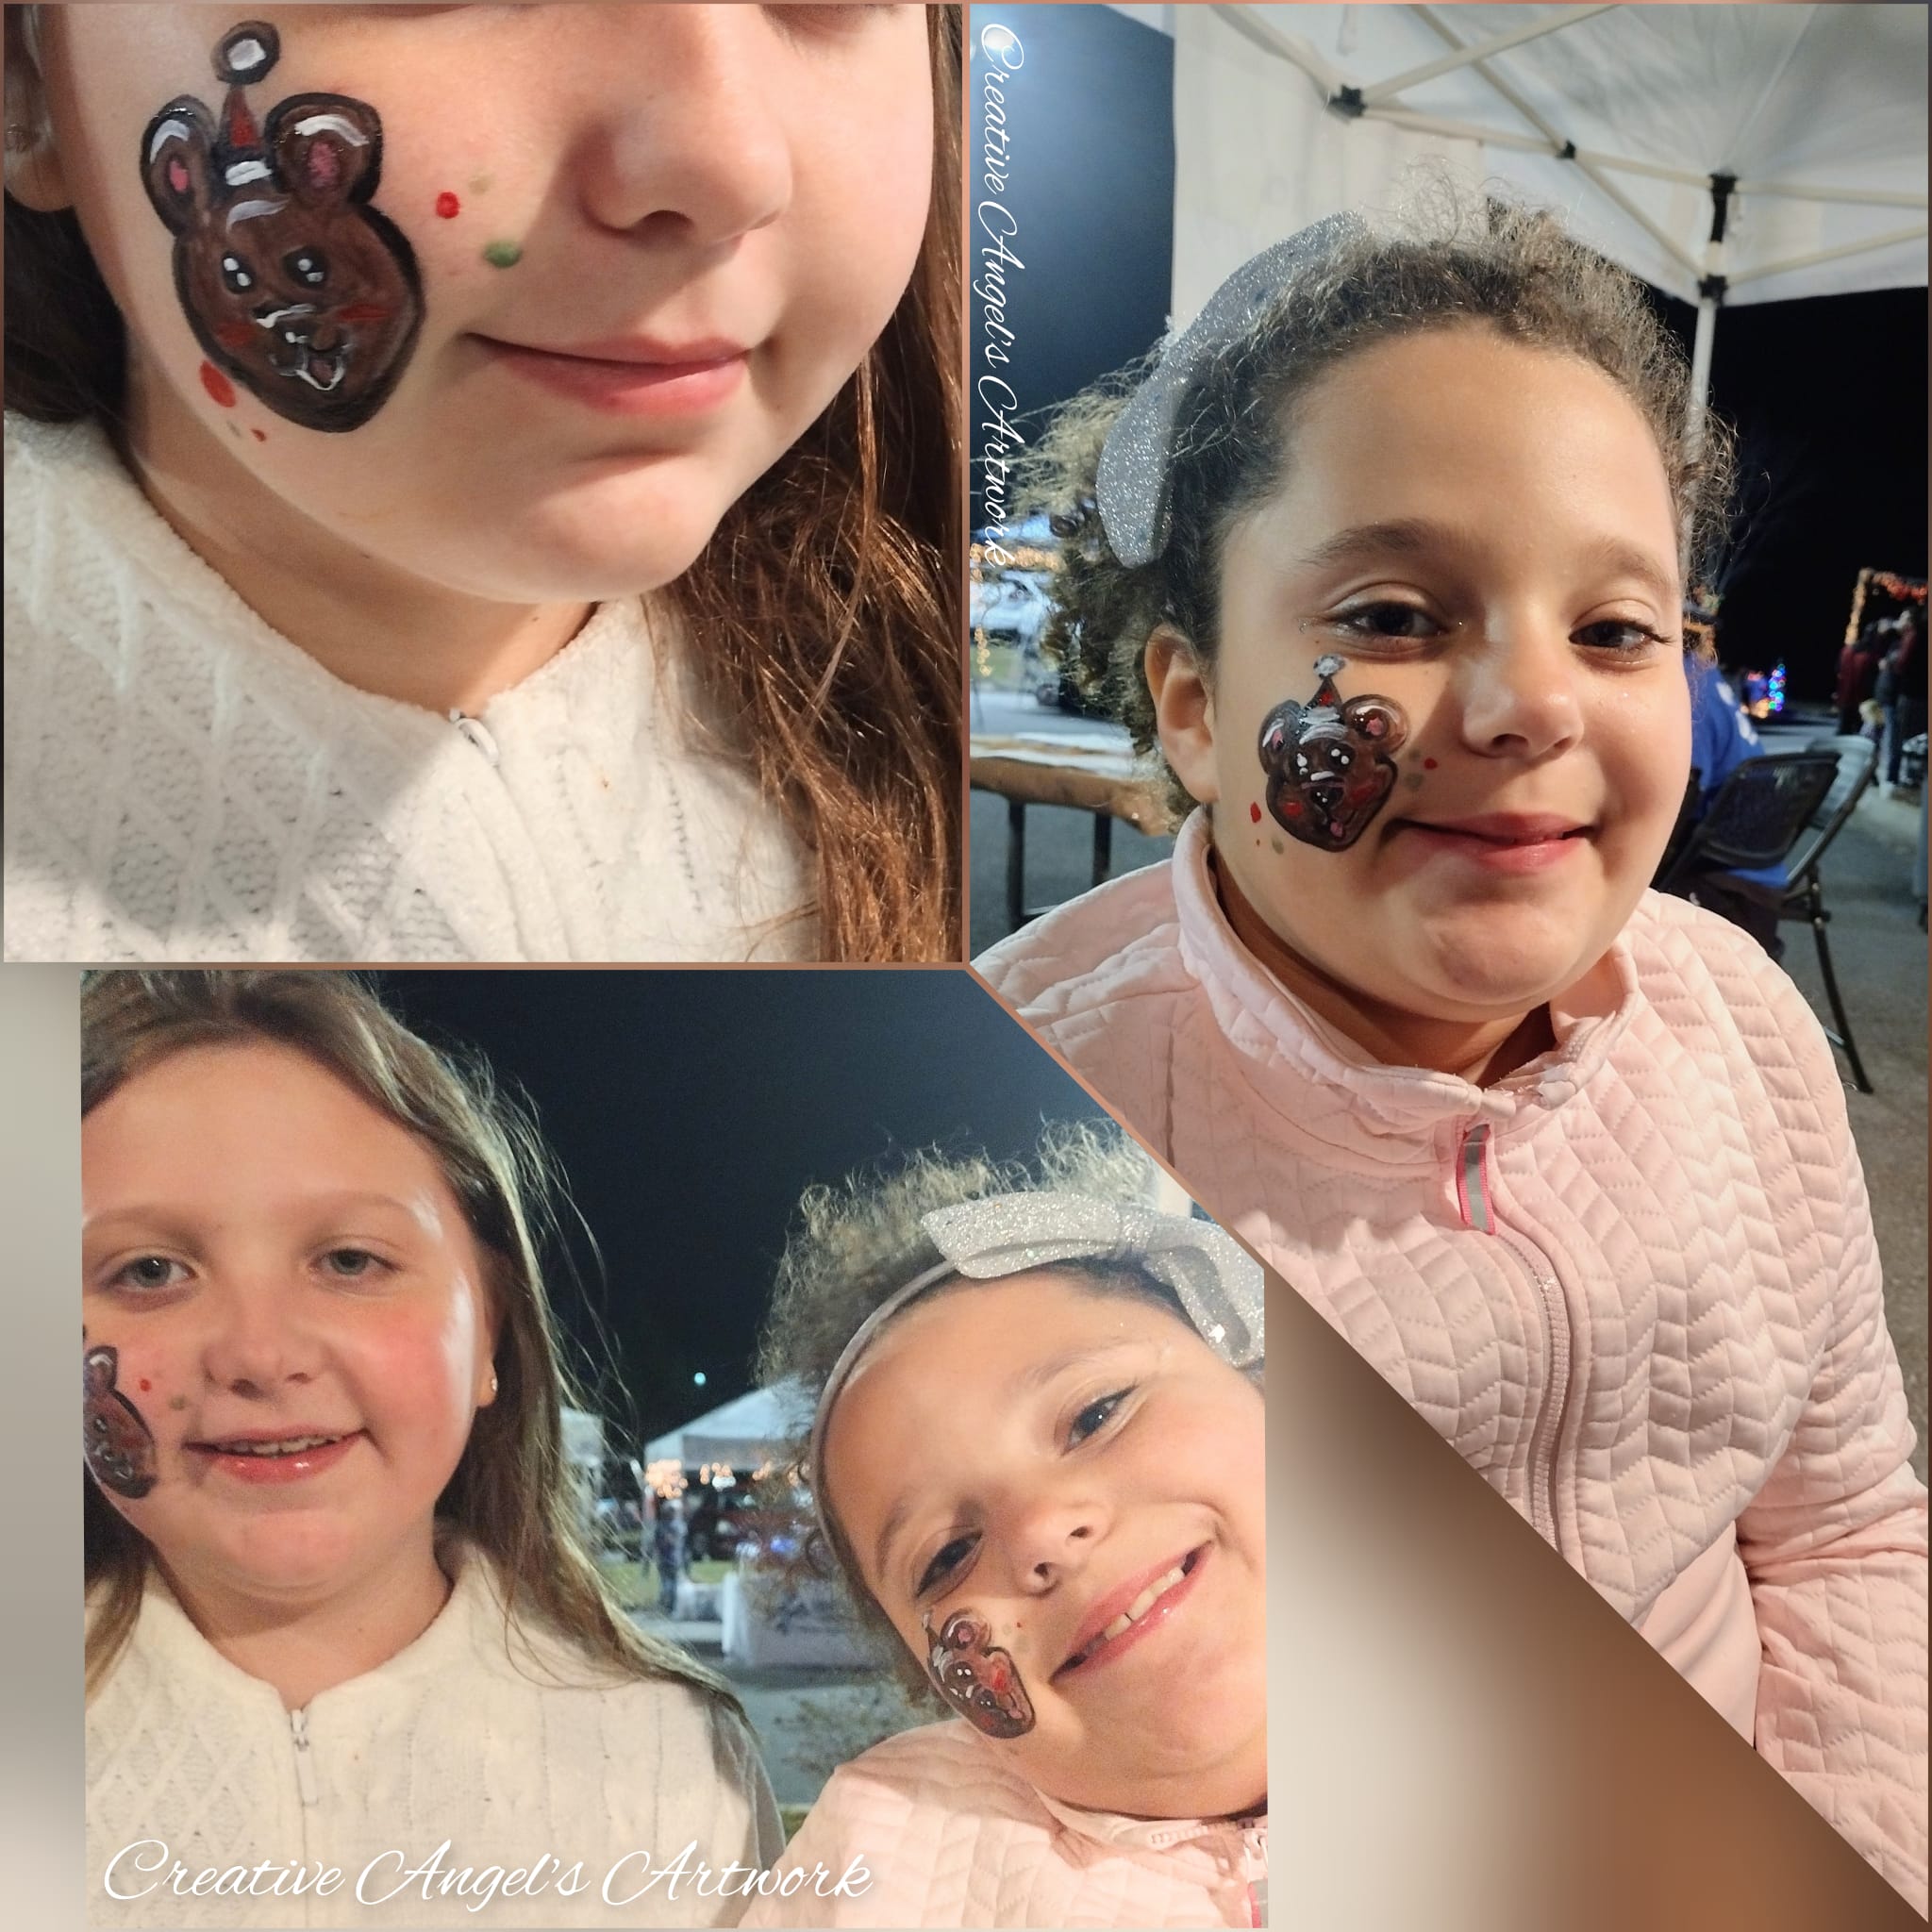 Radiant smiles with creative face paint designs by Brianna Alyssa Bennett, the artistic force behind Creative Angels Artwork